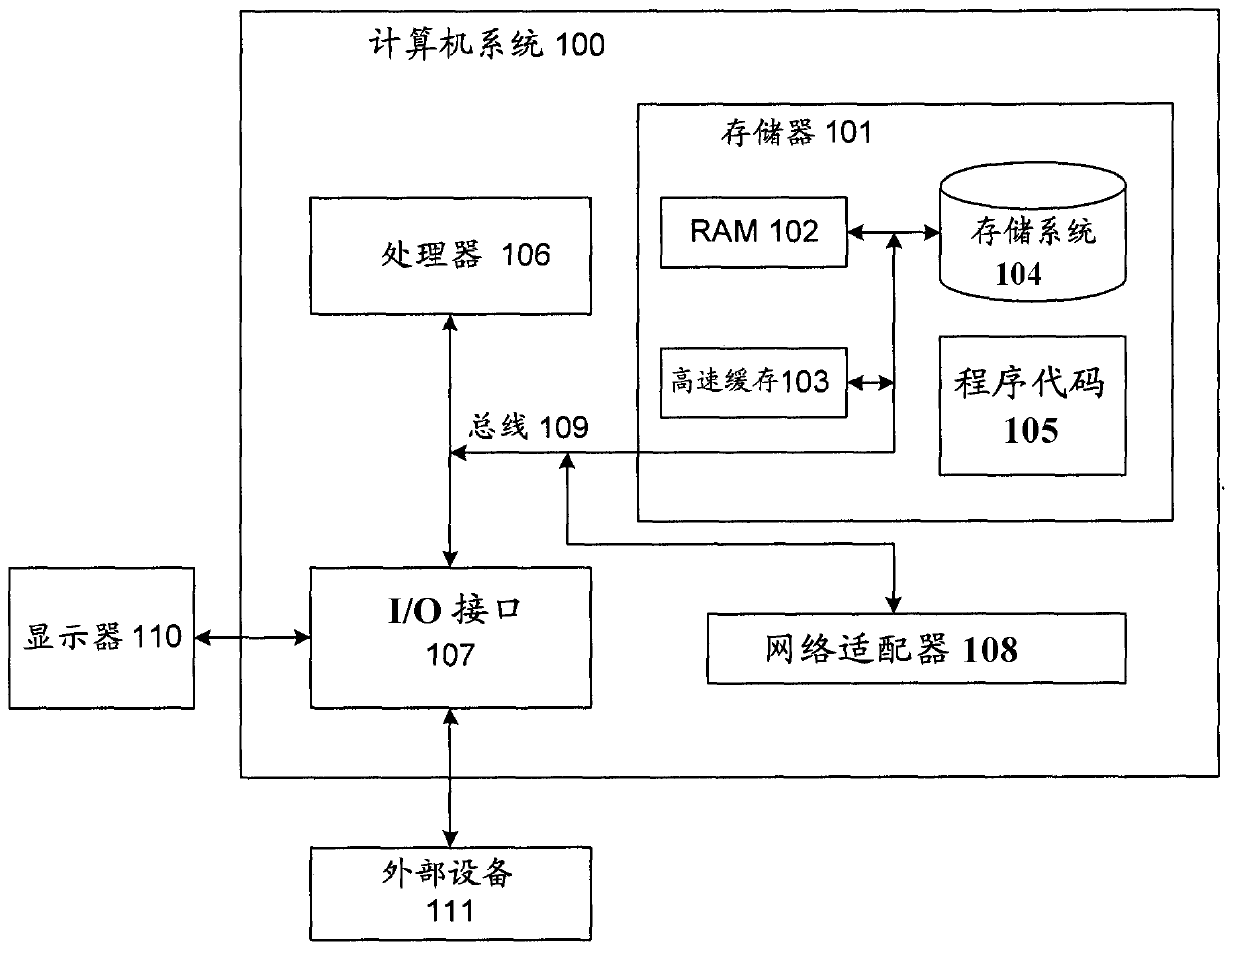 Method and system for ranking analysis tools